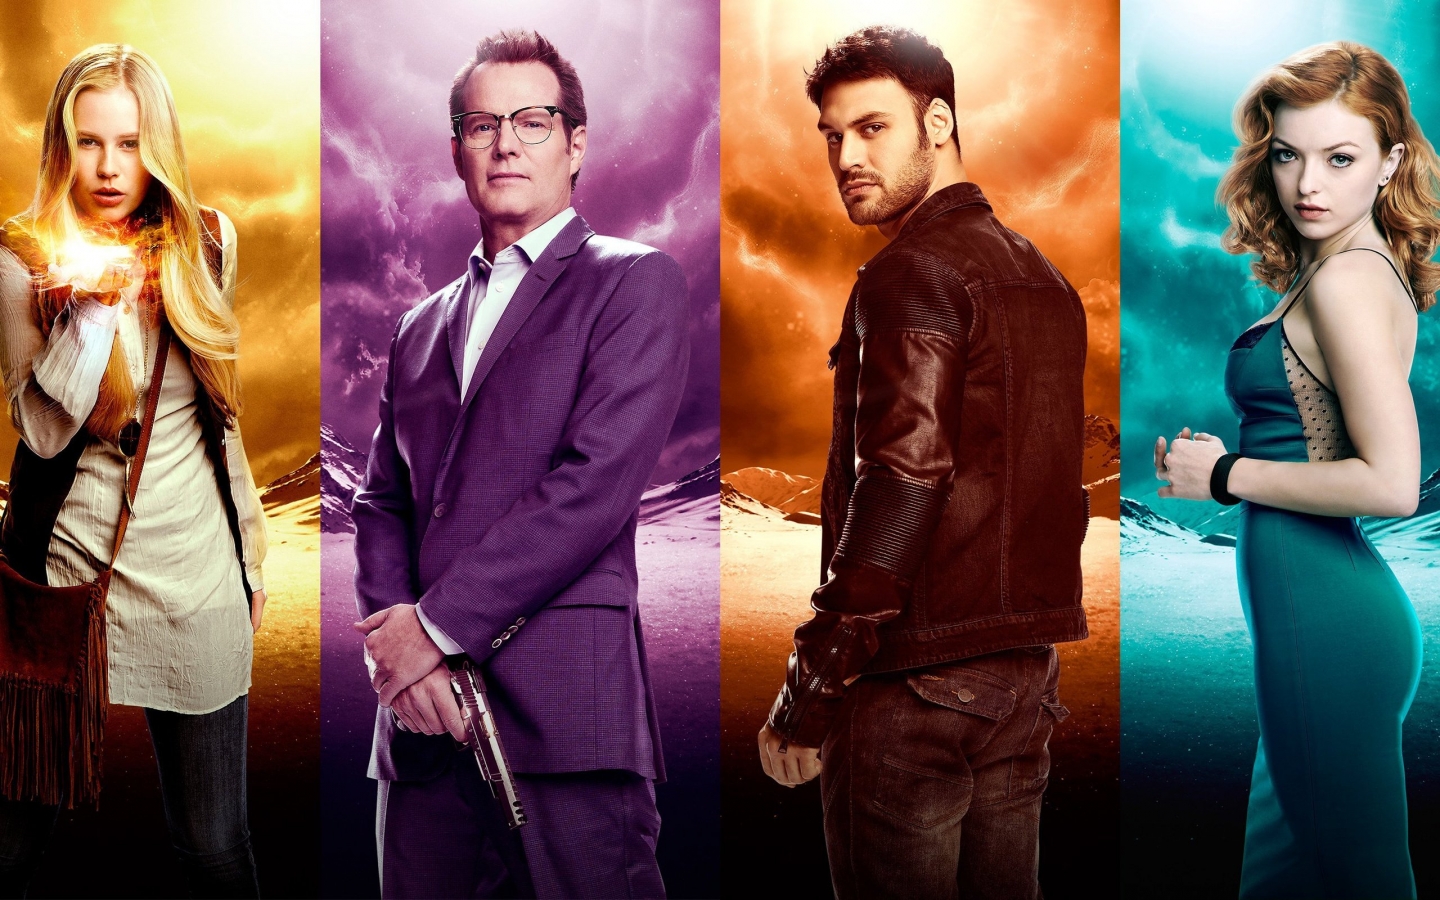 Heroes Reborn Cast for 1440 x 900 widescreen resolution